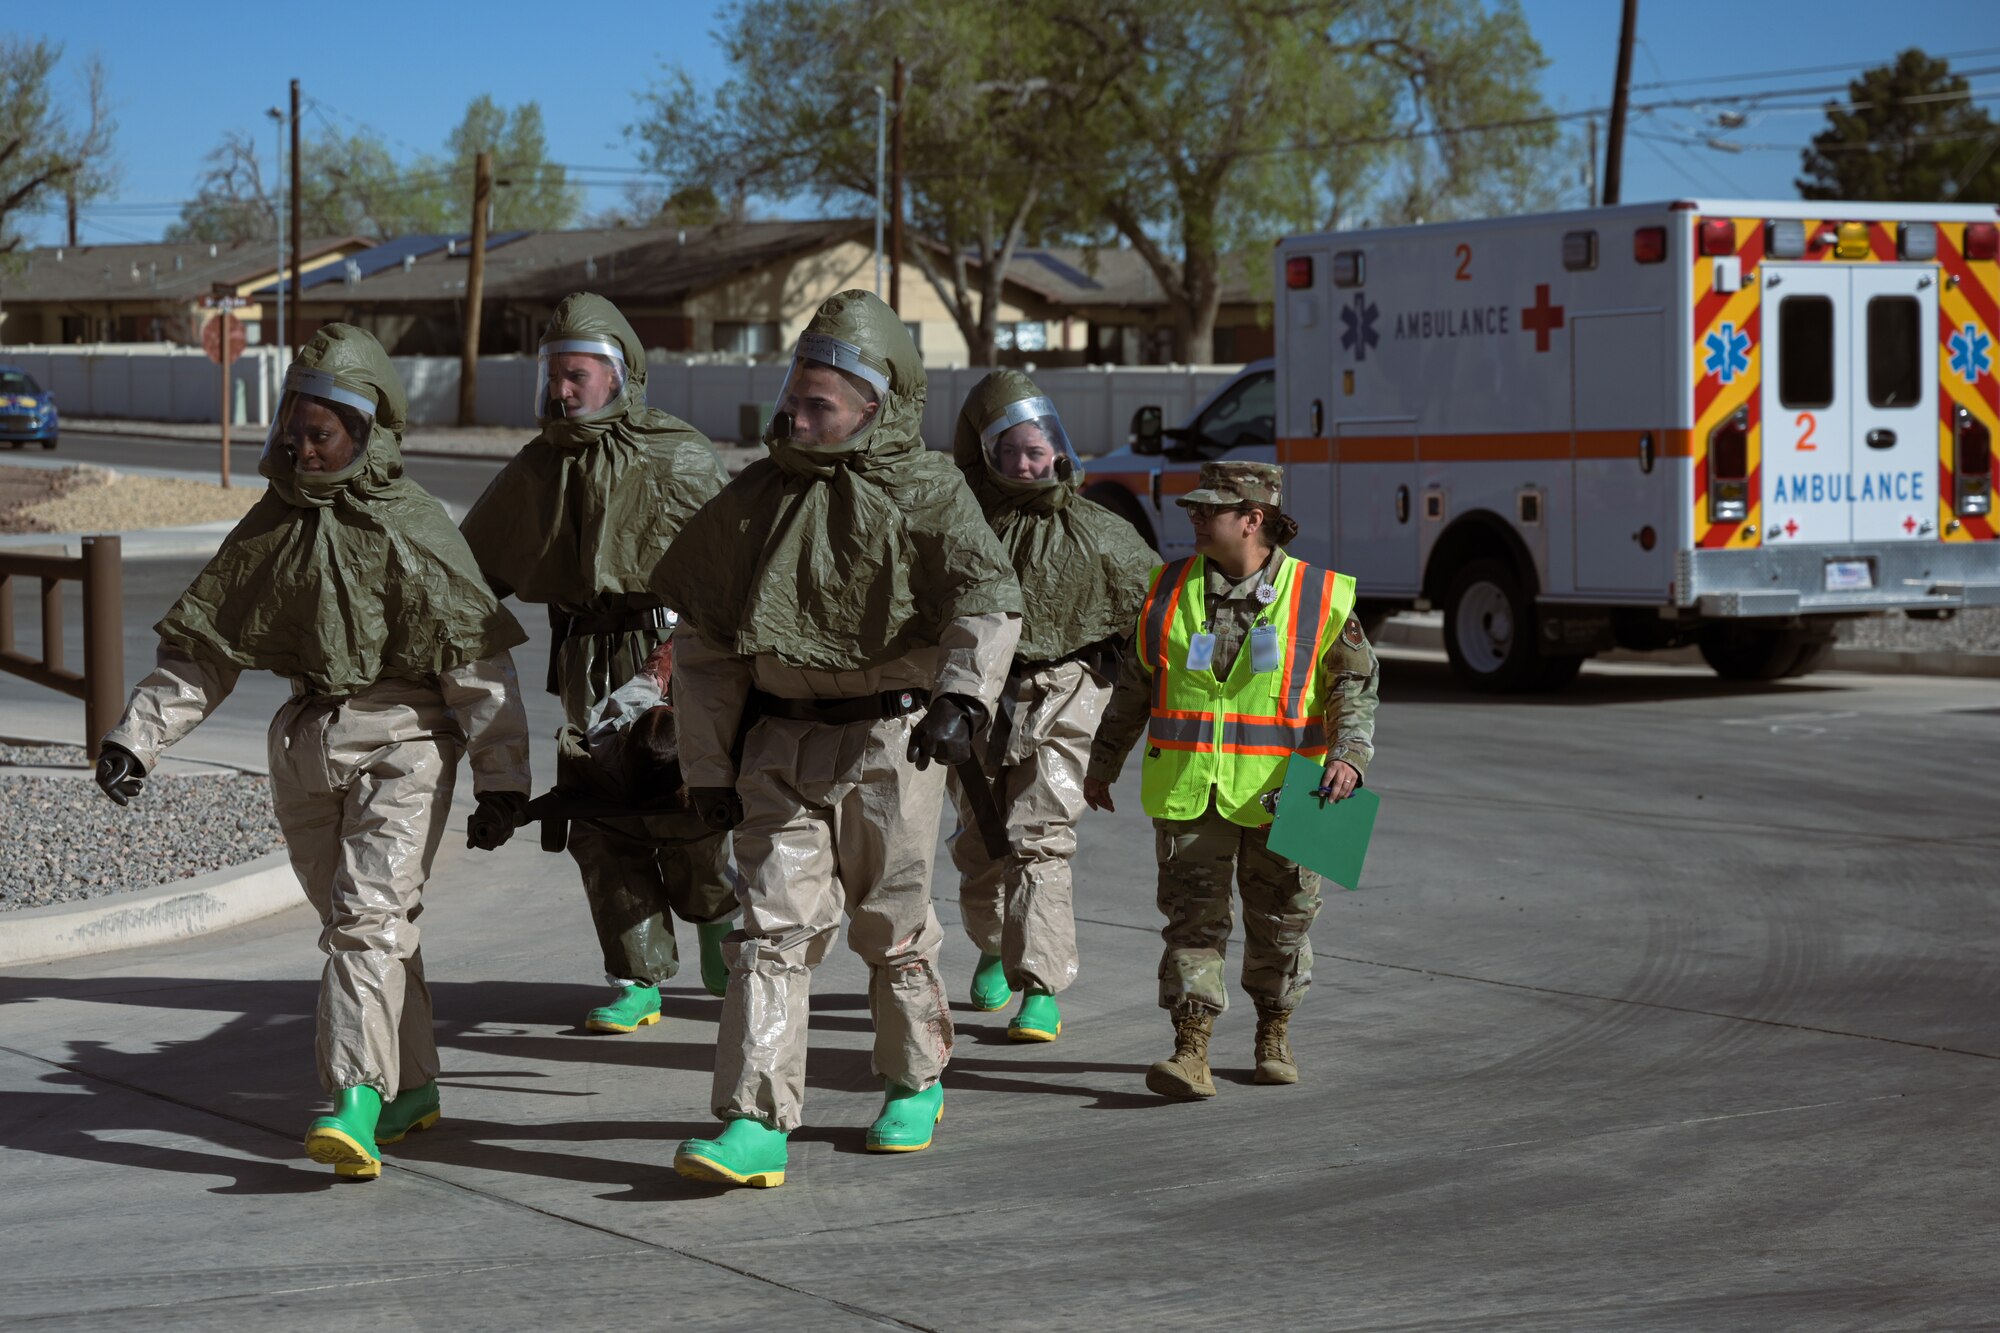 Members from the 49th Medical Group prepare a patient to be transported during a Ready Eagle exercise at Holloman Air Force Base, New Mexico, March 30, 2023. The initial response teams were responsible for on-the-scene care and patient transport. (U.S. Air Force by Senior Airman Antonio Salfran)